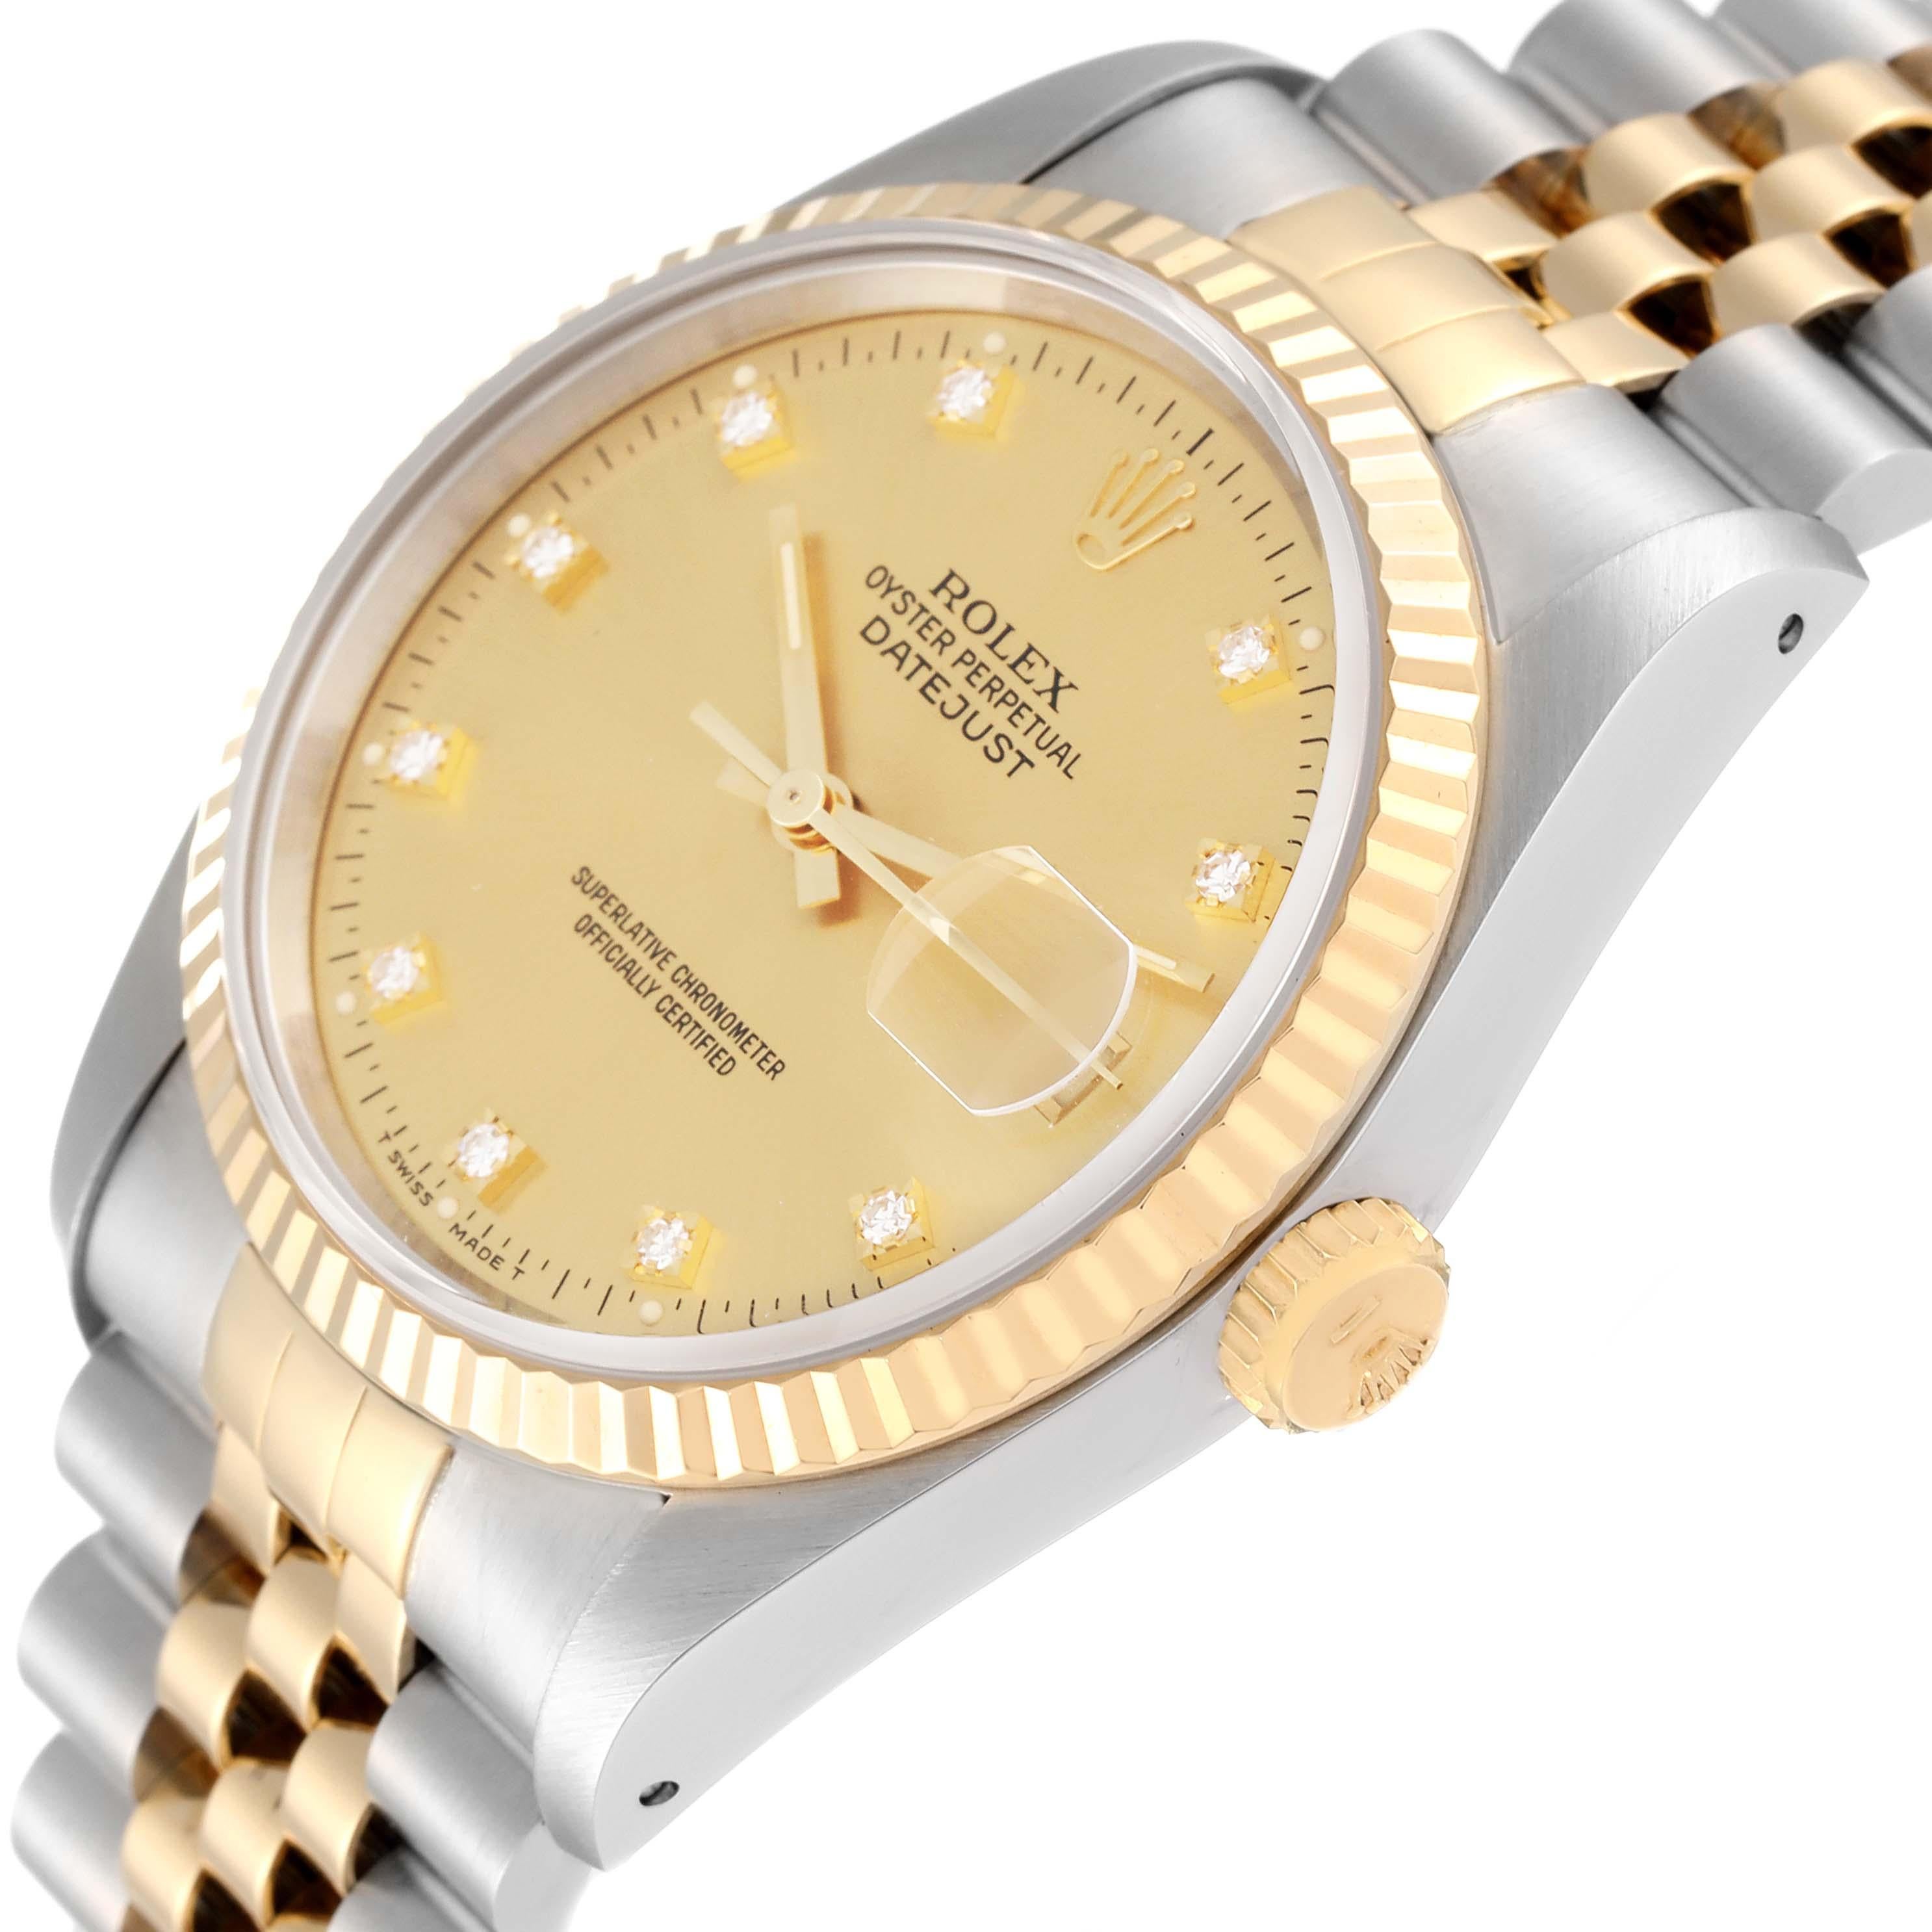 Rolex Datejust Diamond Dial Steel Yellow Gold Mens Watch 16233 Box Papers 1